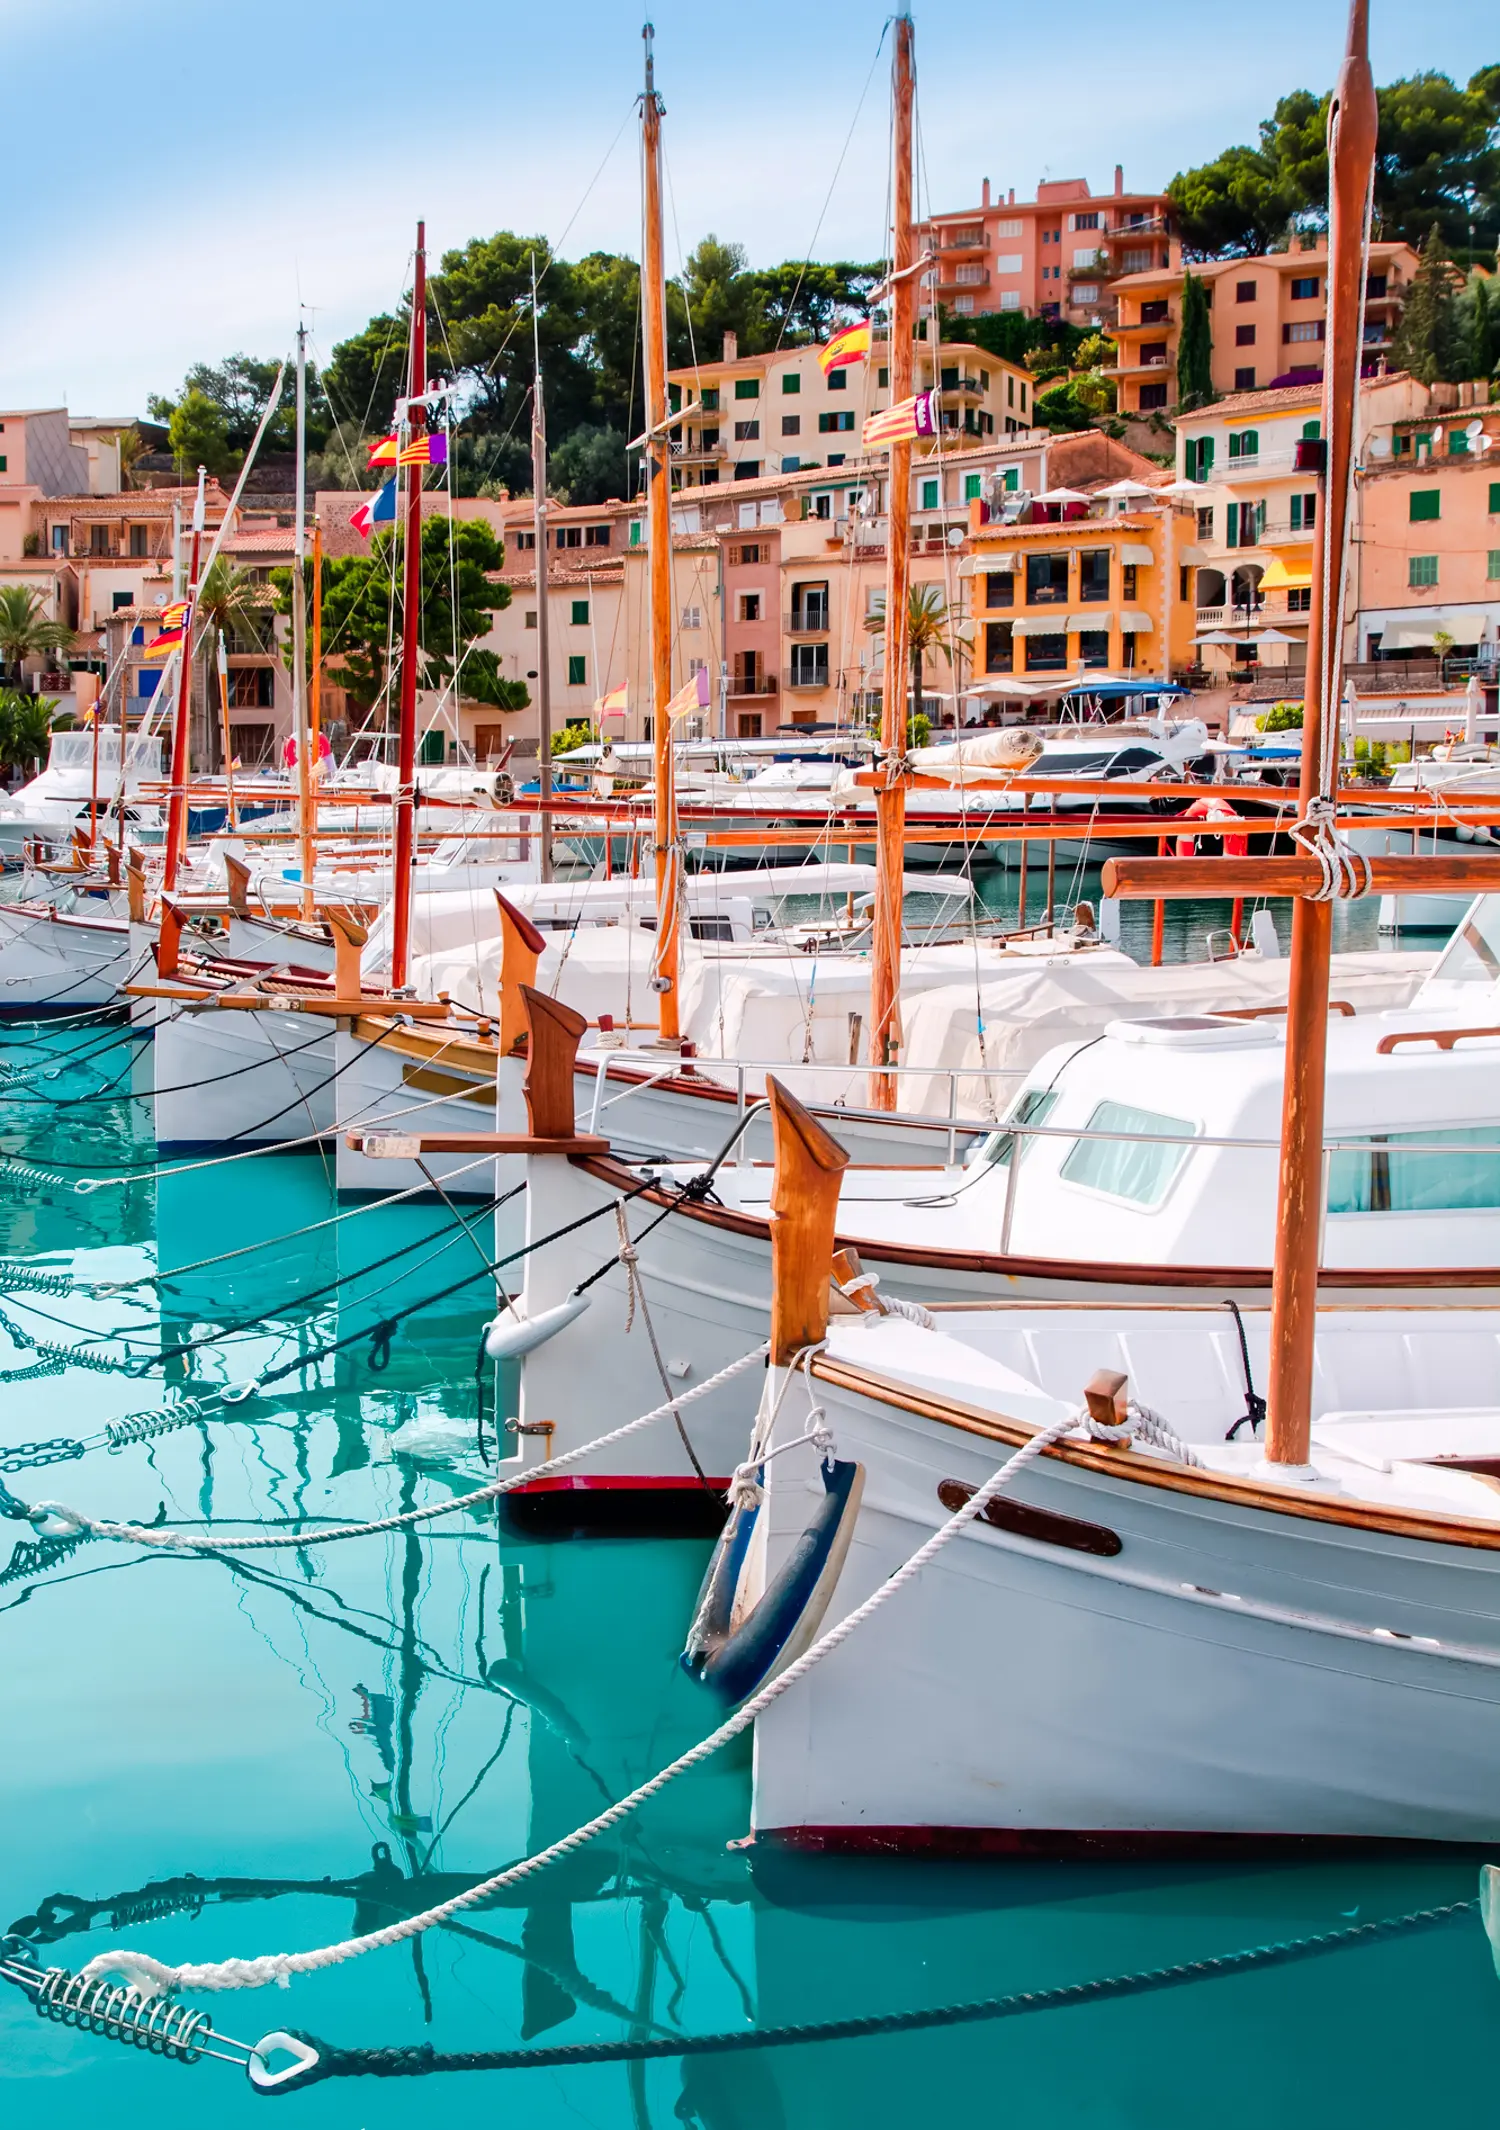 Mallorca - White sailboats in a row in the turquoise water in Port de Sóller with beige buildings in the background.